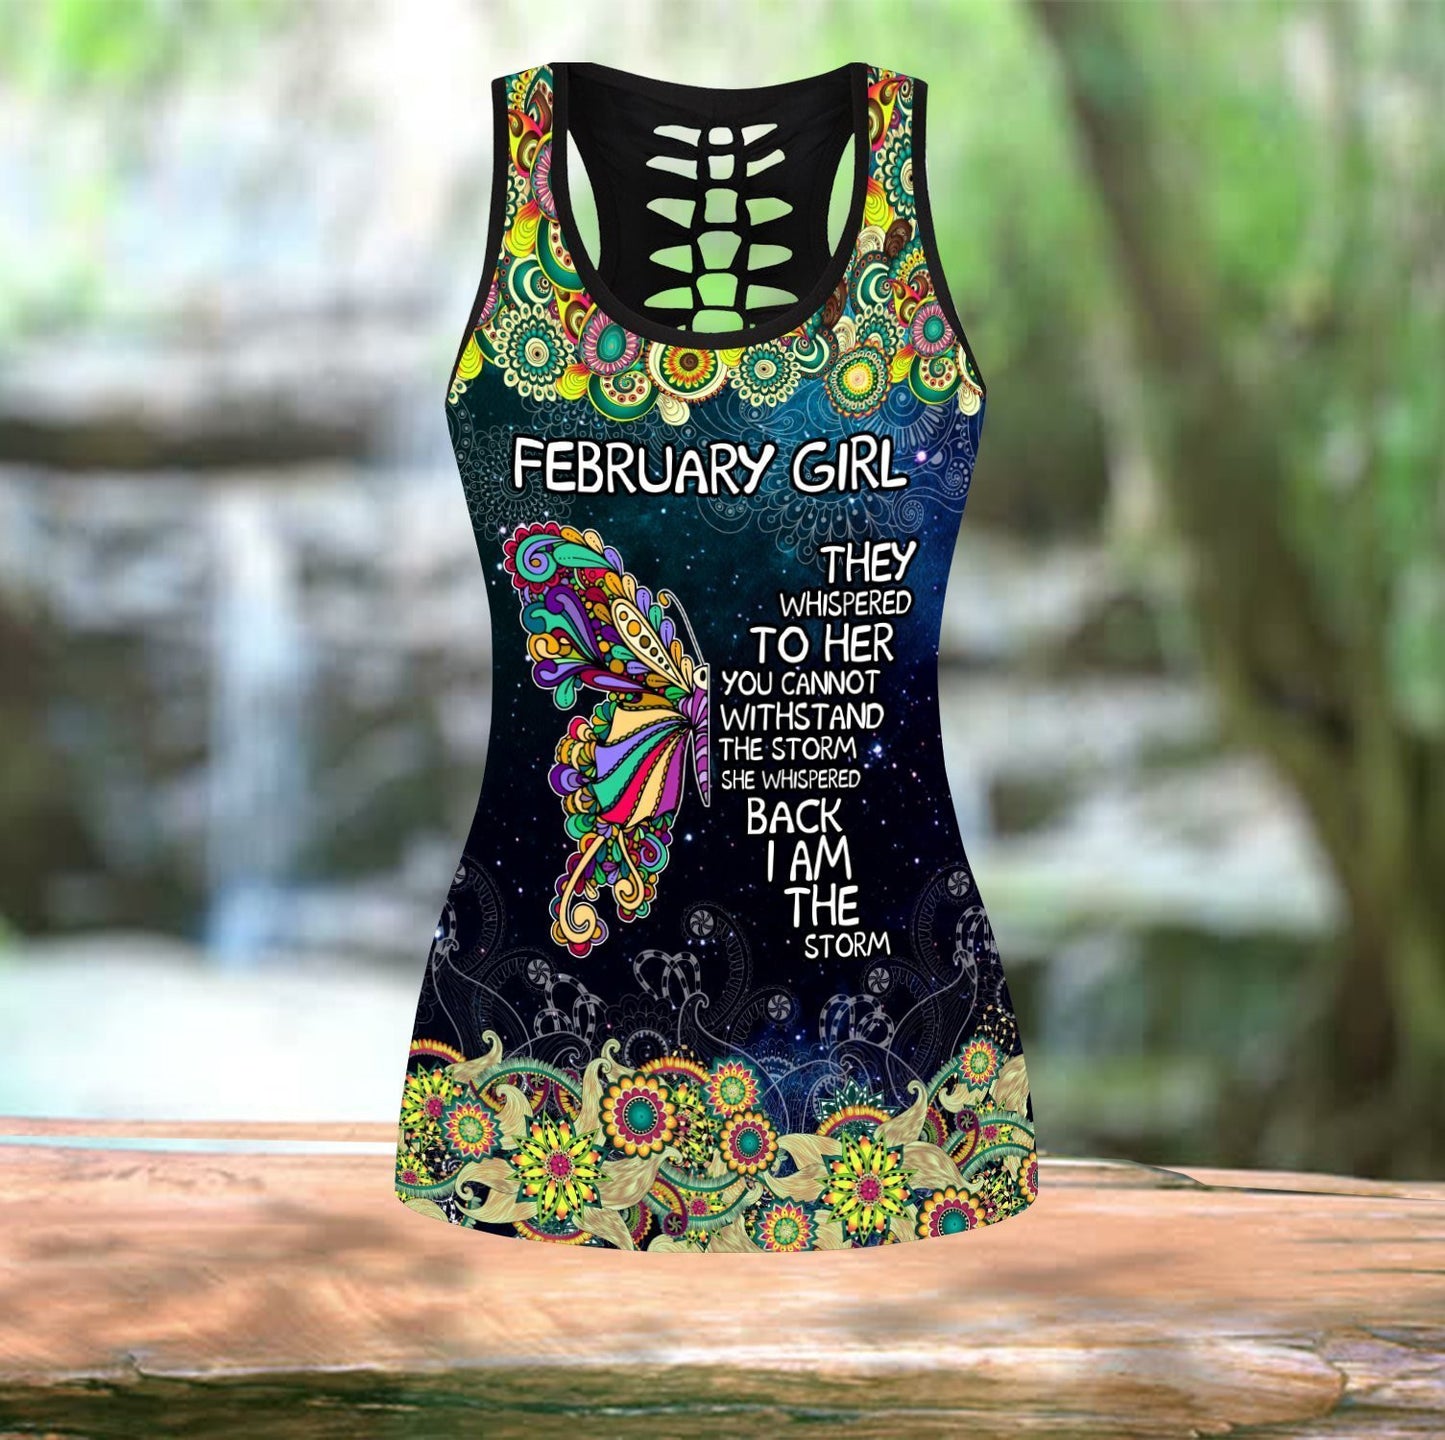 February Girl They Whispered To Her You Cannot Withstand The Storm - Christian Tank Top And Legging Sets For Women